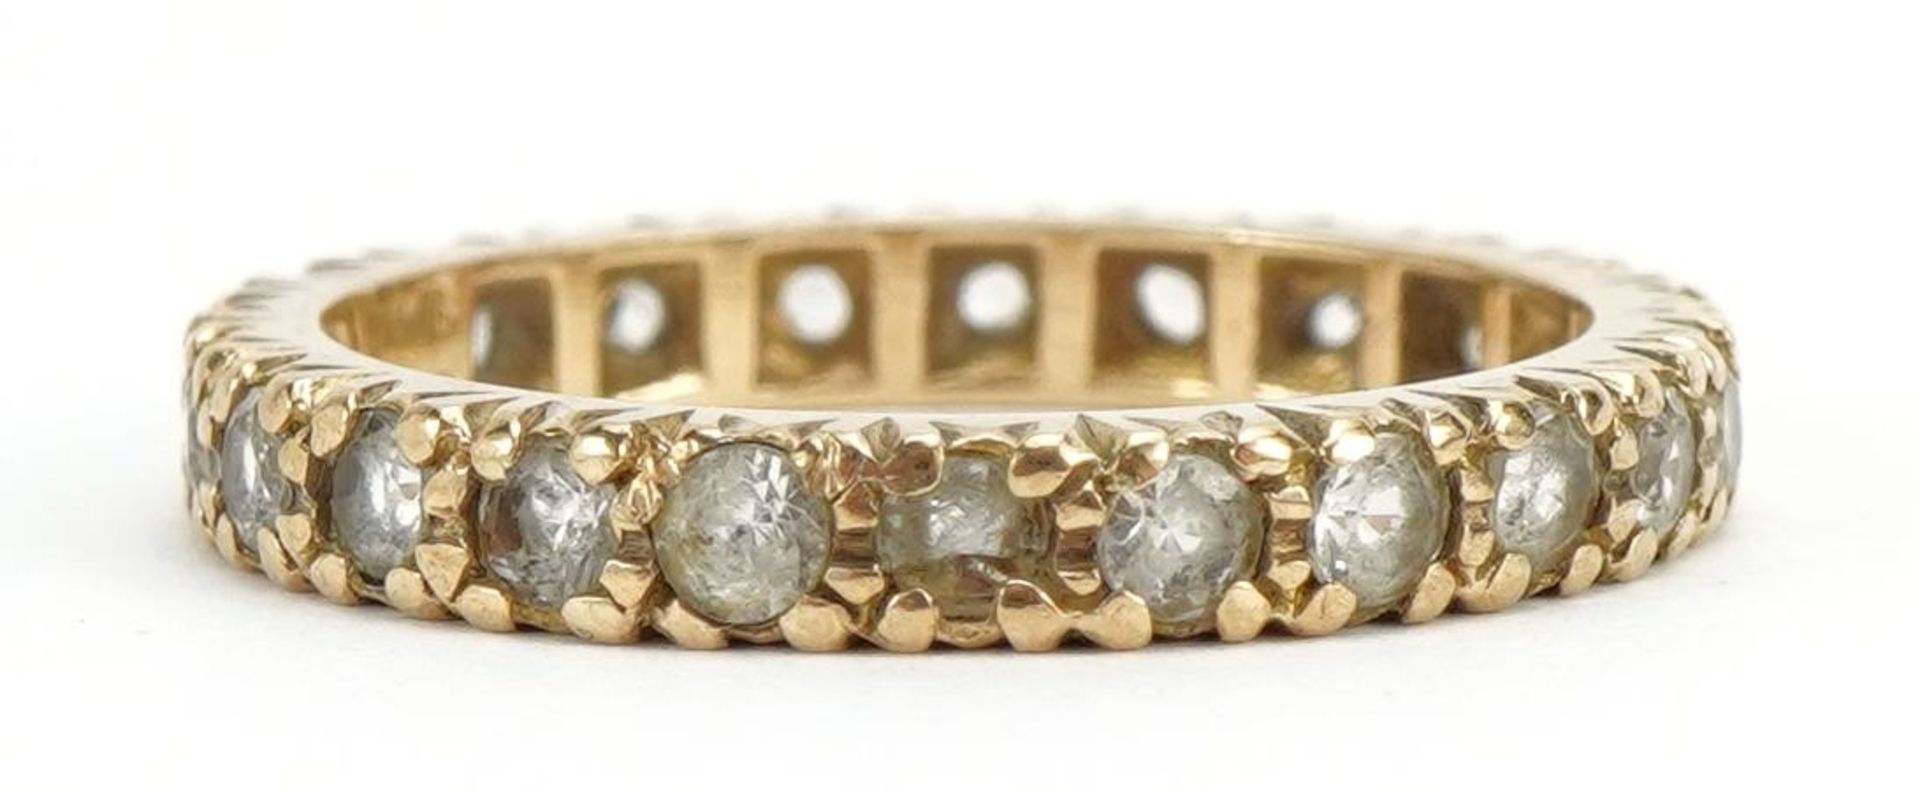 9ct gold spinel eternity ring, size M/N, 2.5g - Image 2 of 3